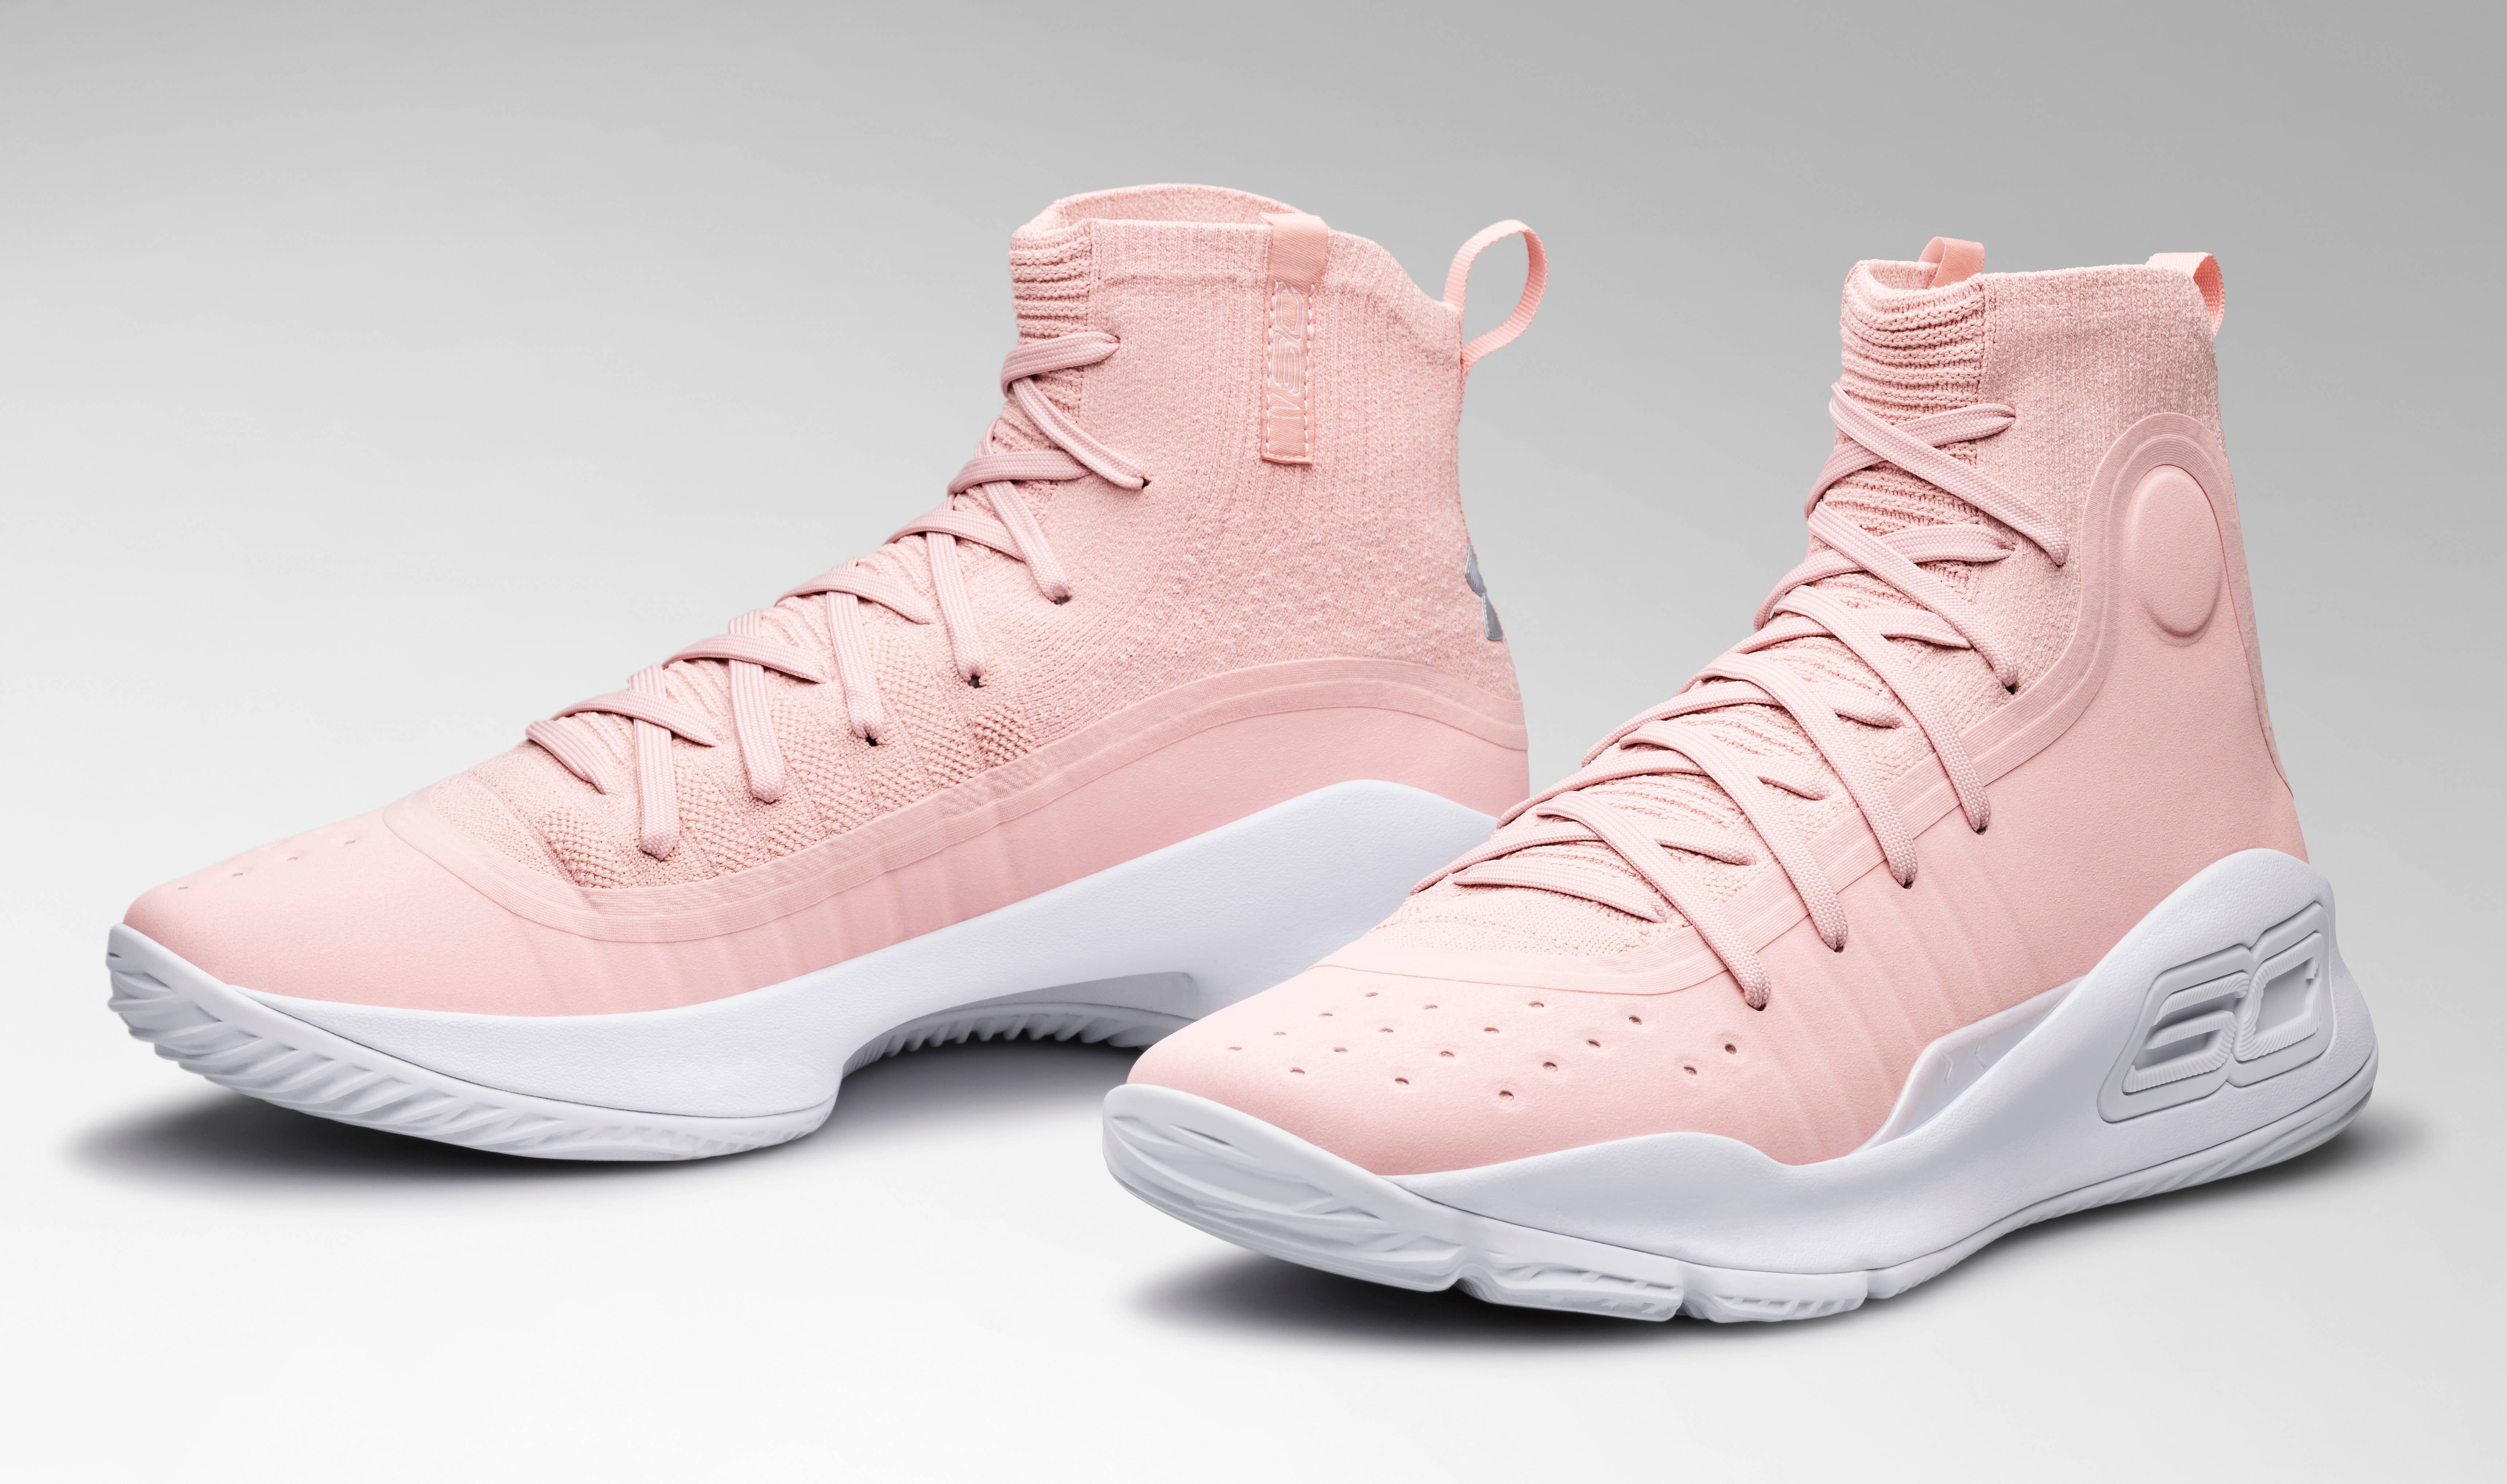 Under Armour Curry 4 Flushed Pink